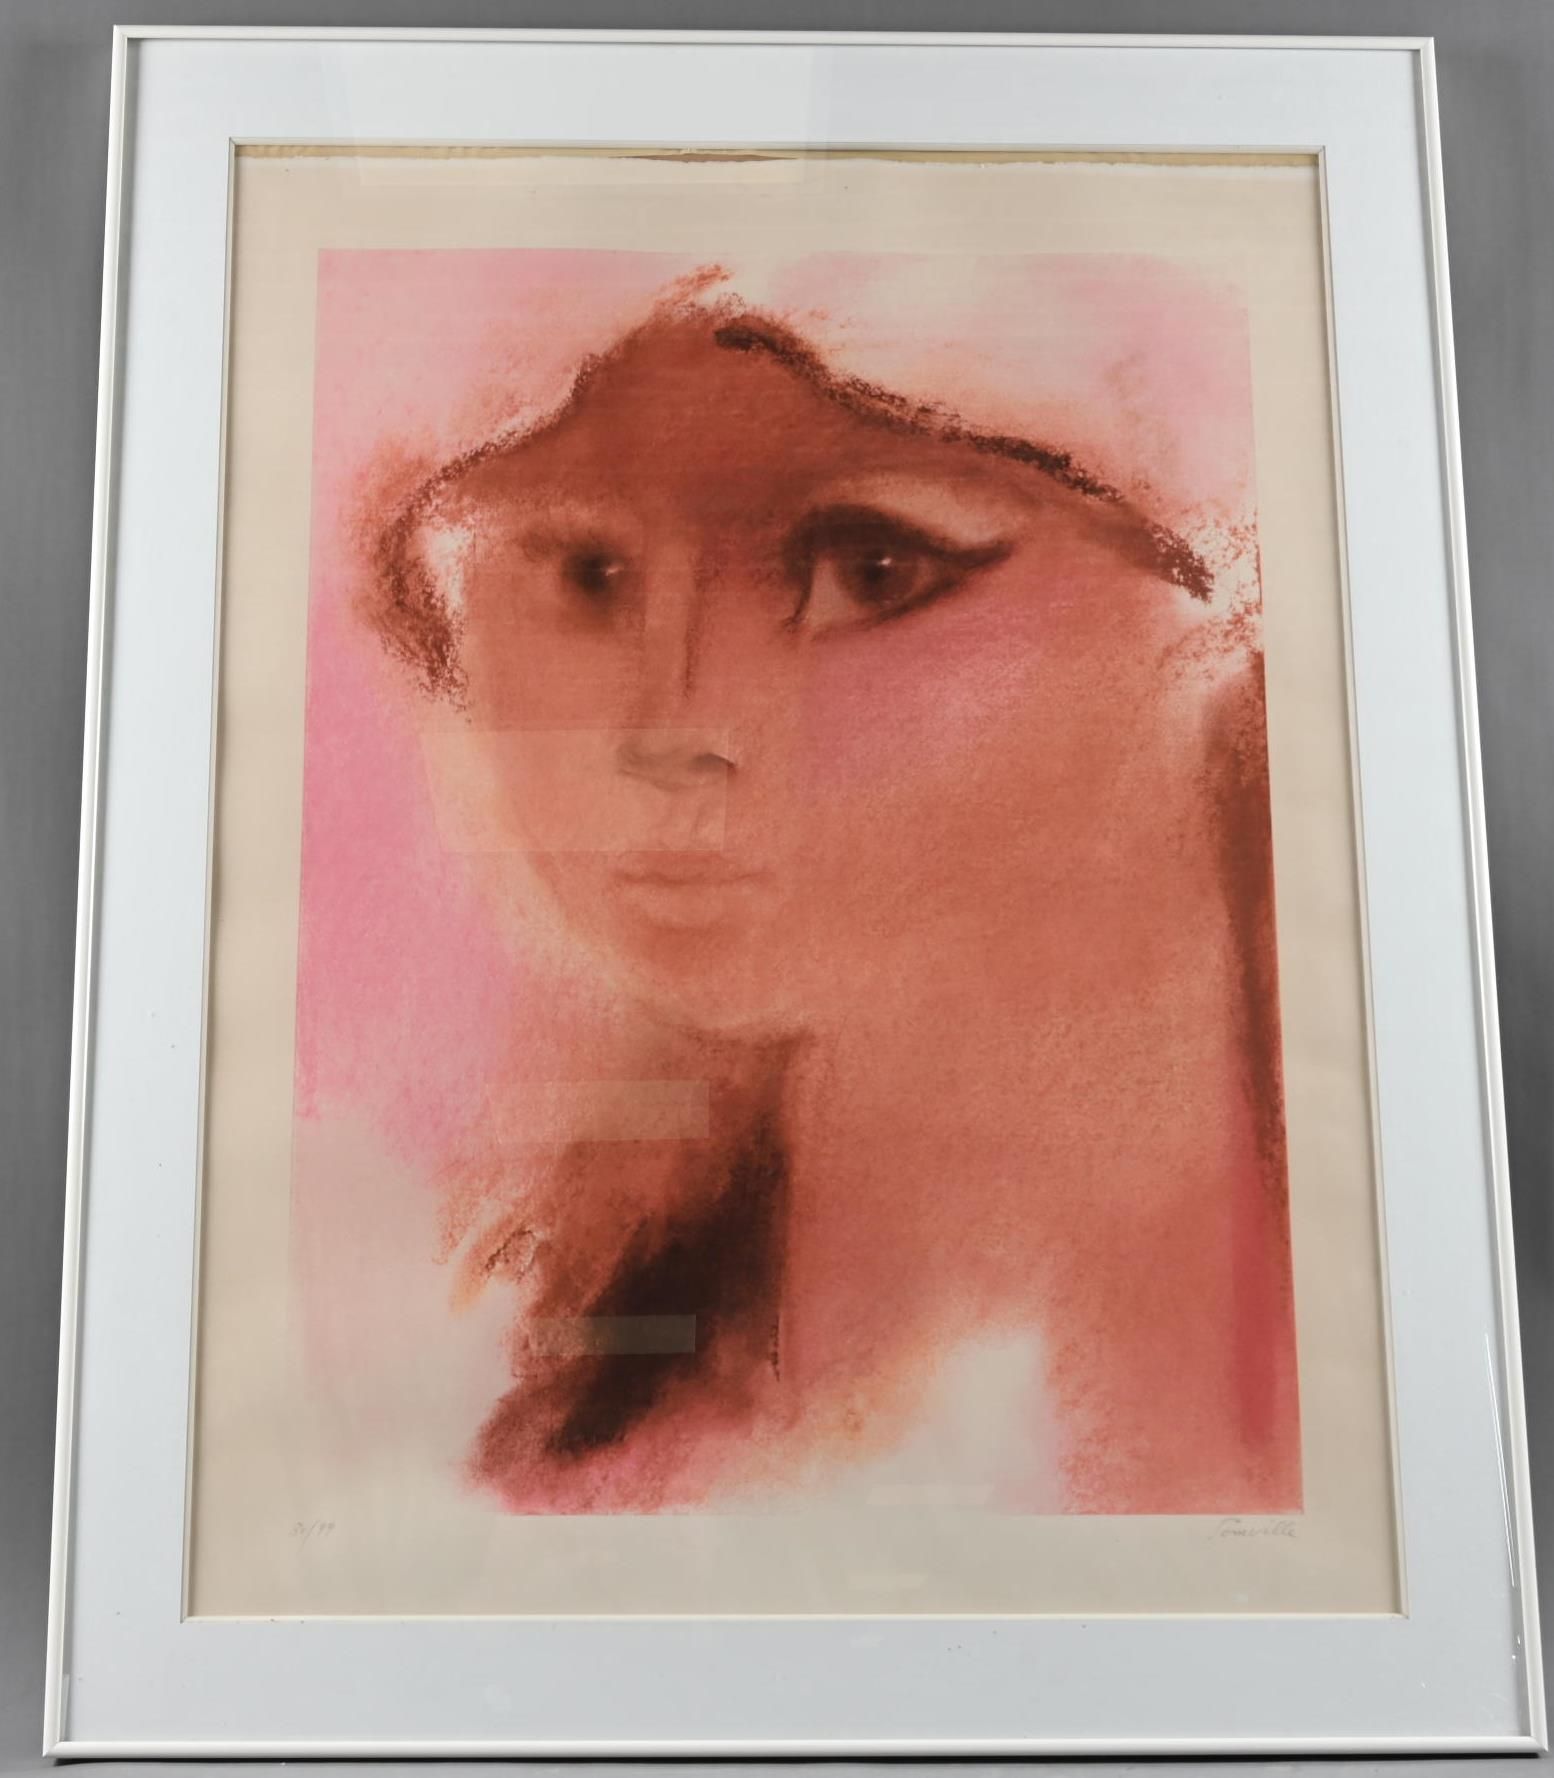 Roger SOMEVILLE Lithographie Roger SOMEVILLE ( 1923 - 2014 )

"Face"

Lithograph&hellip;